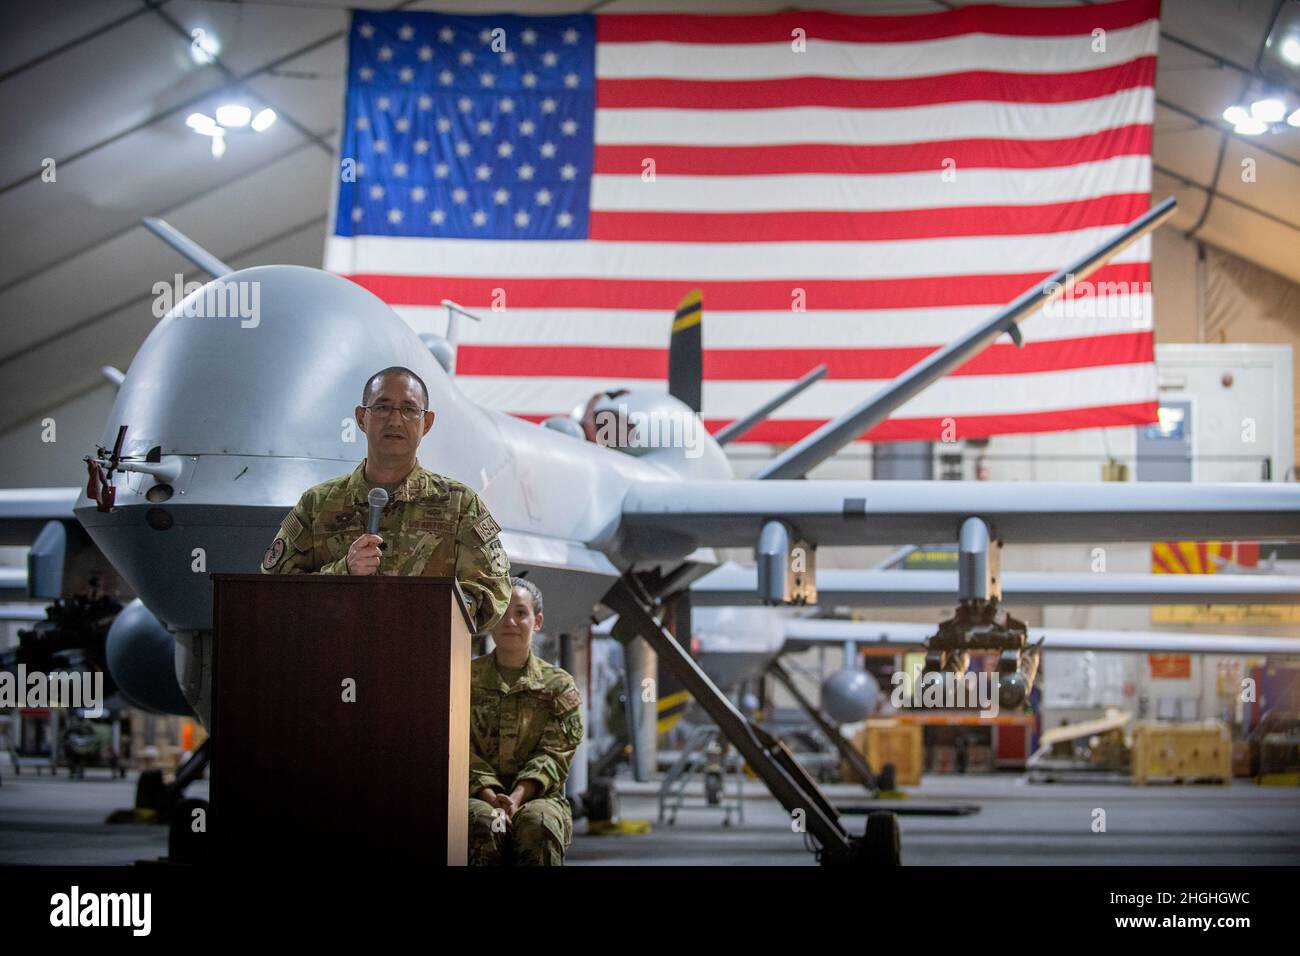 U.S. Air Force Lt. Col. Joseph Clancy, 41st Expeditionary Electronic Combat Squadron commander, gives remarks during the EECS Change of Command Ceremony at Al Dhafra Air Base, United Arab Emirates, Aug 3, 2021. Clancy assumed command of the 41st EECS from Maj. David T. Brown earlier in the ceremony. Stock Photo